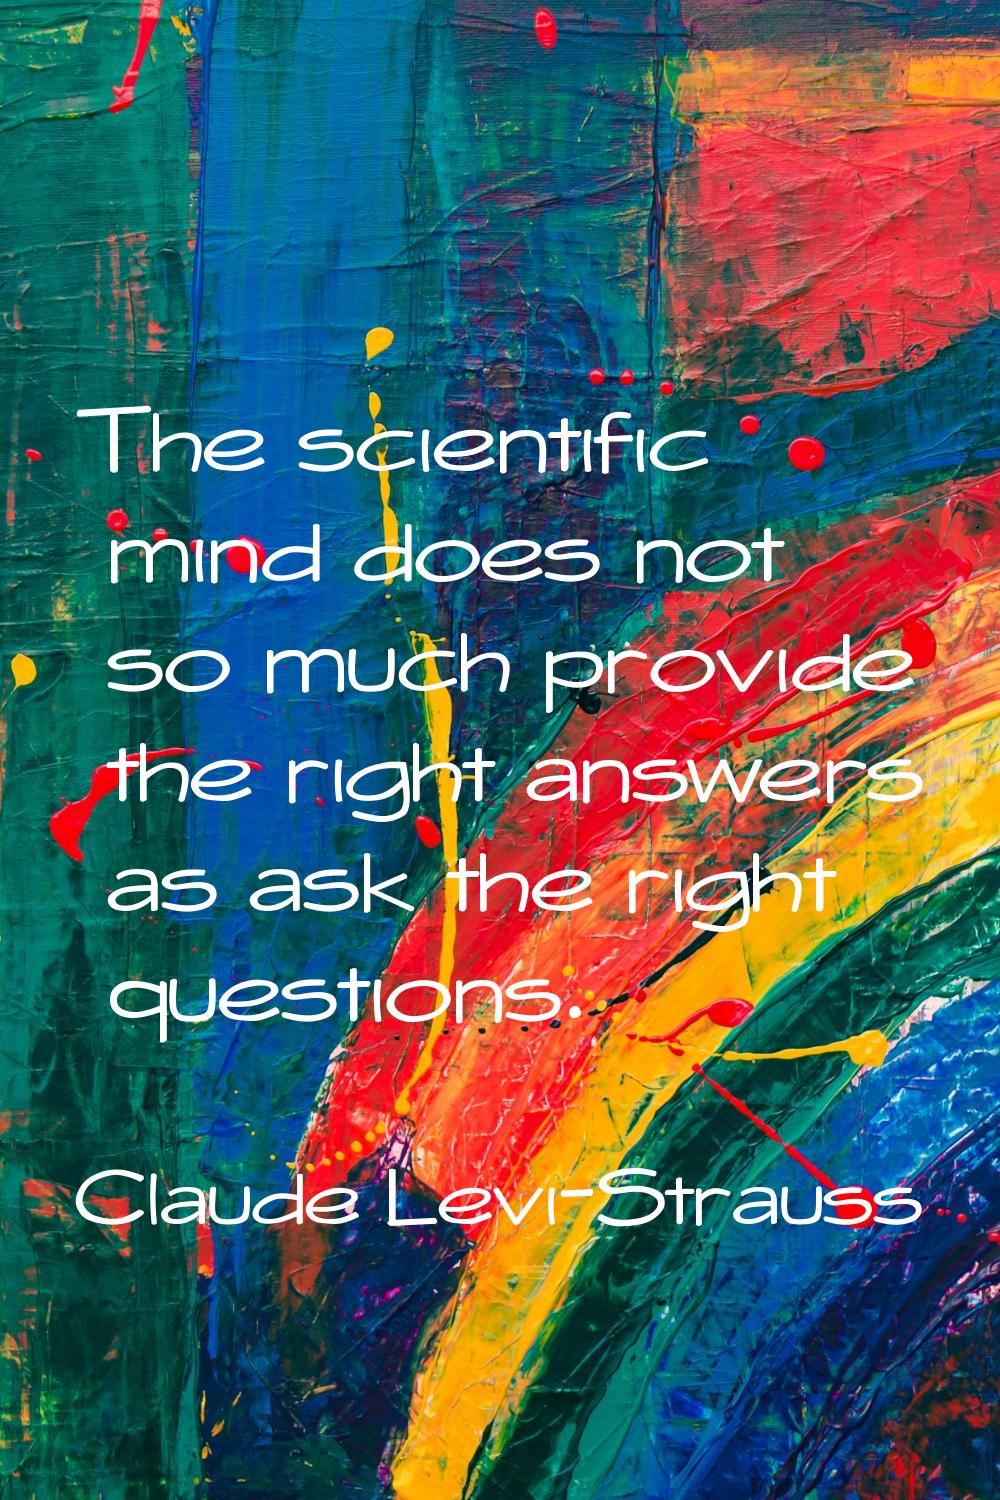 The scientific mind does not so much provide the right answers as ask the right questions.